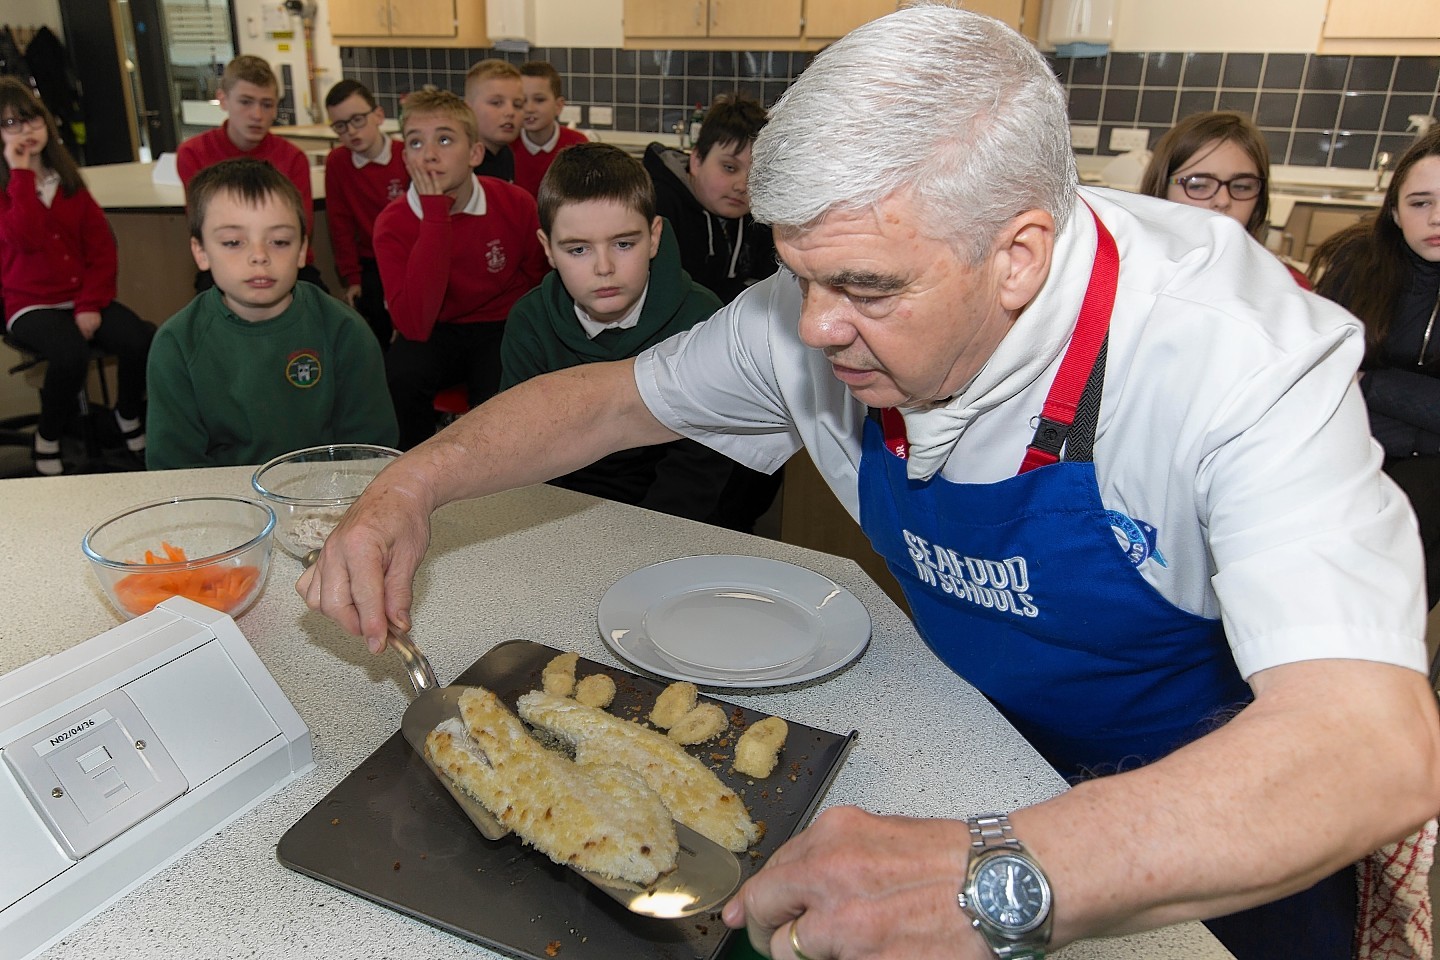 Aviemore-based chef Alan Frost, prepares a fish dish during the Seafood in Schools roadshow